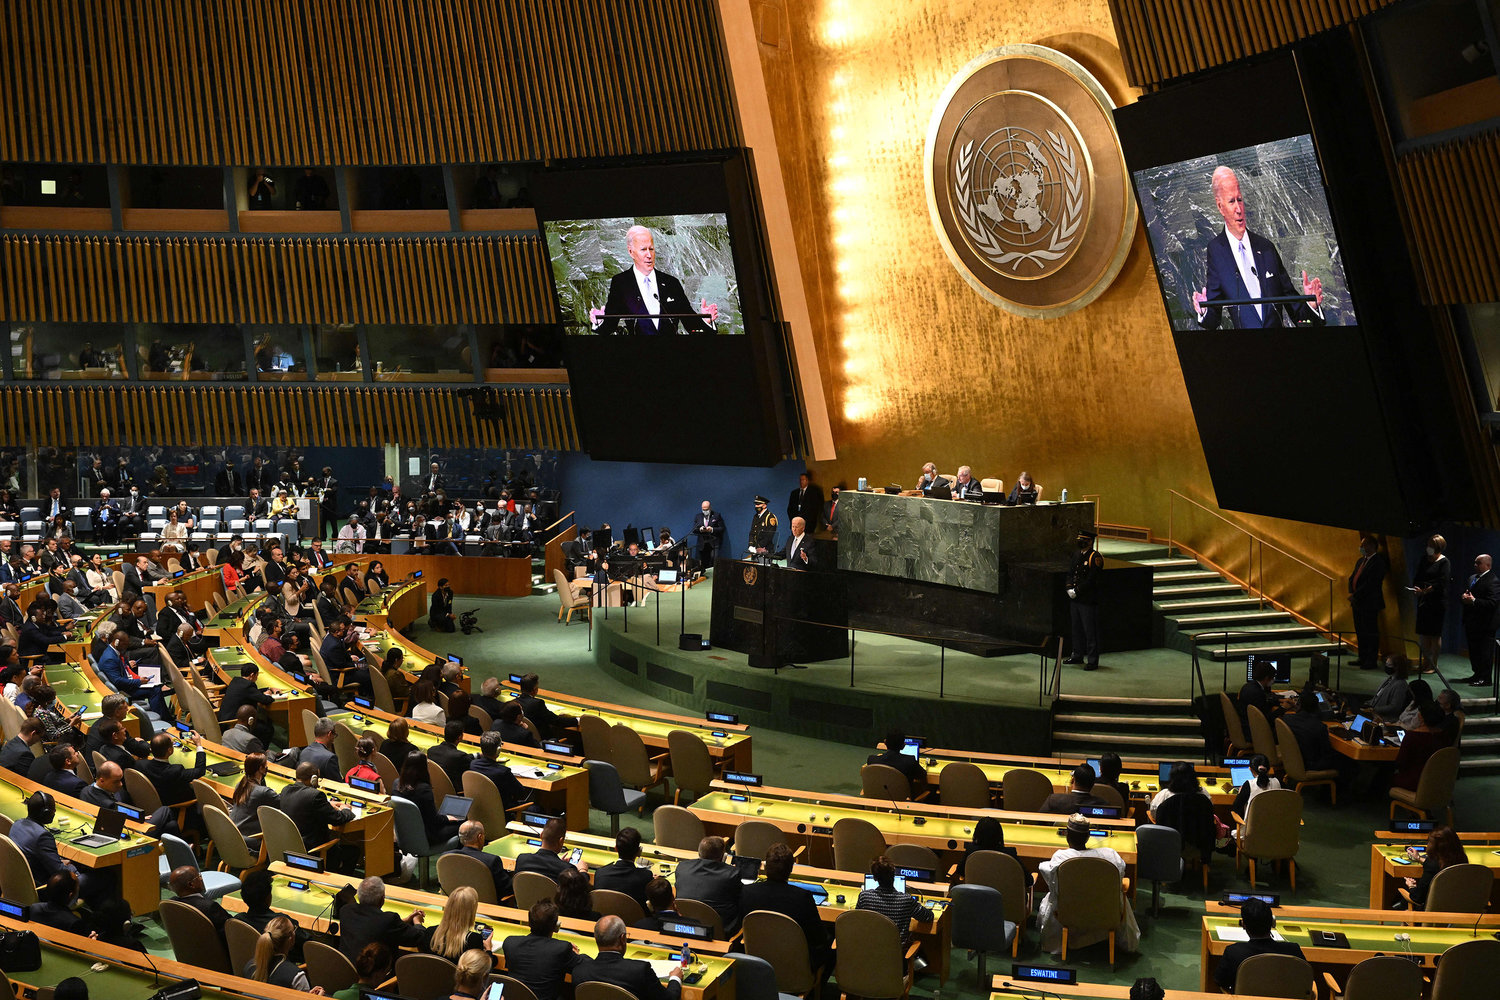 U.S. President Joe Biden addresses the 77th session of the United Nations General Assembly at the UN headquarters in New York City on Wednesday, Sept. 21, 2022. (Mandel Ngan/AFP/Getty Images/TNS)